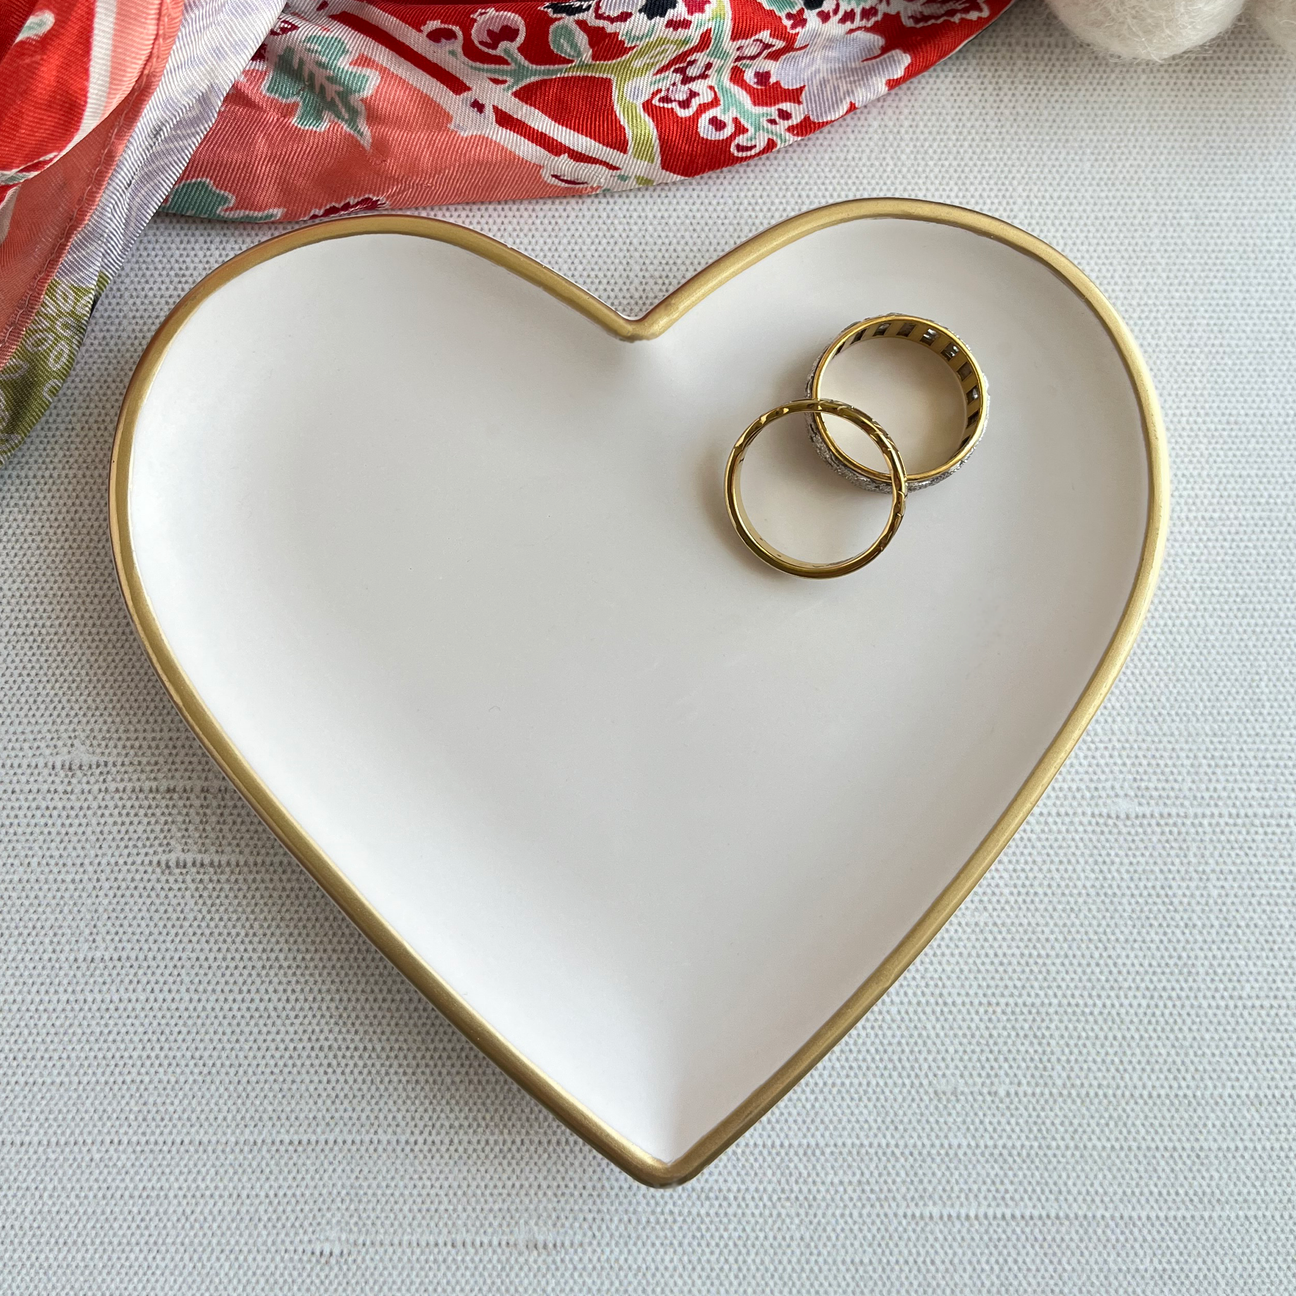 cream colored heart shaped dish with jewelry on it